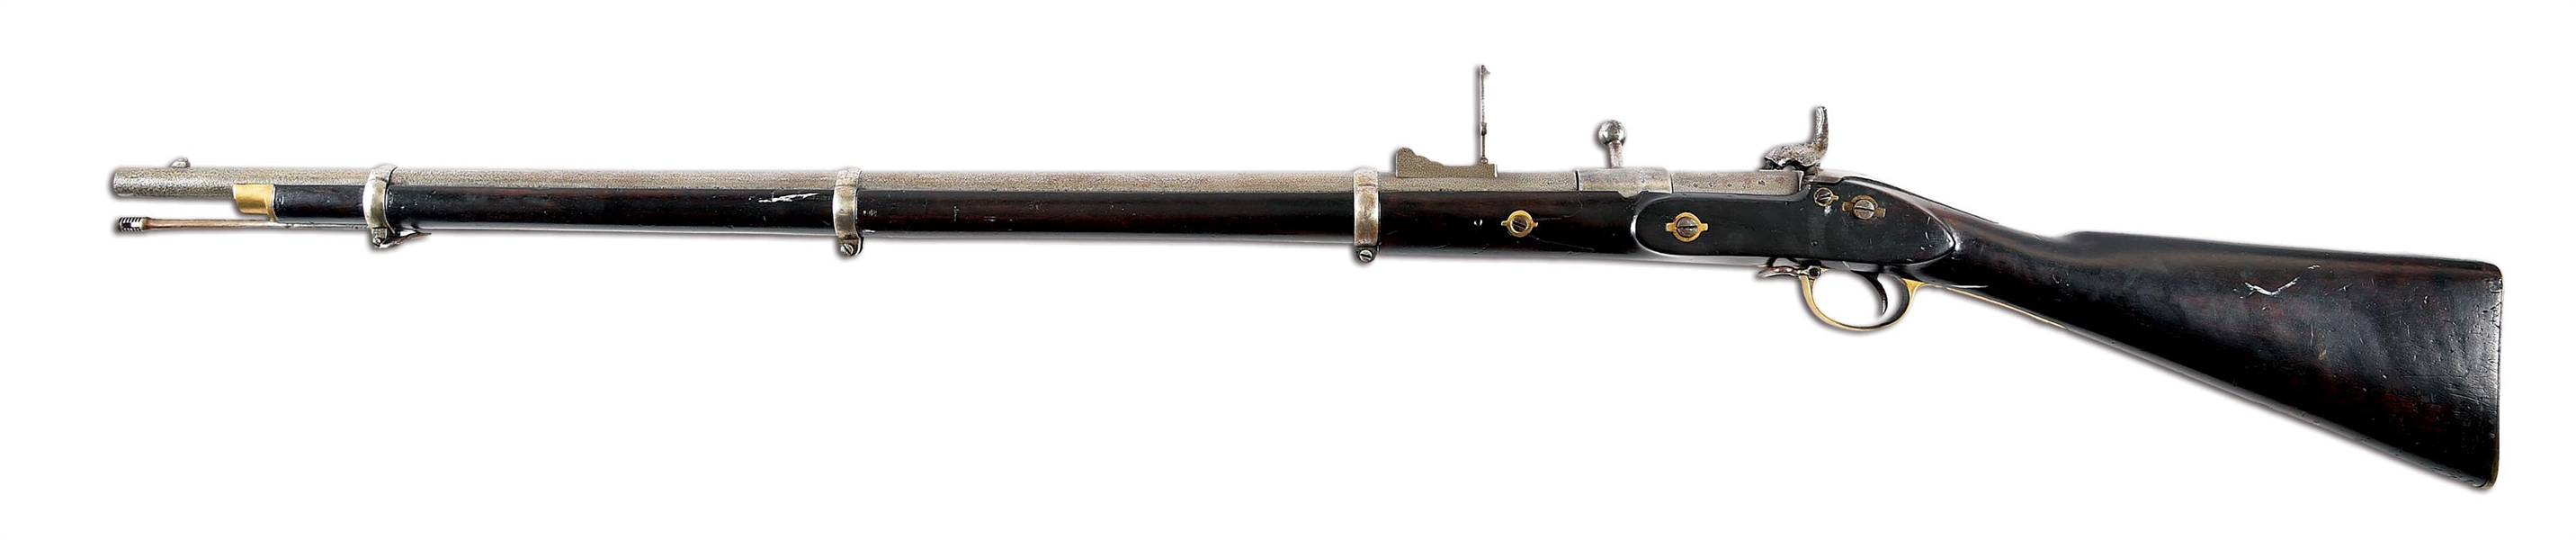 (A) LINDNER ALTERED BRITISH PATTERN 1853 ENFIELD RIFLE MUSKET.